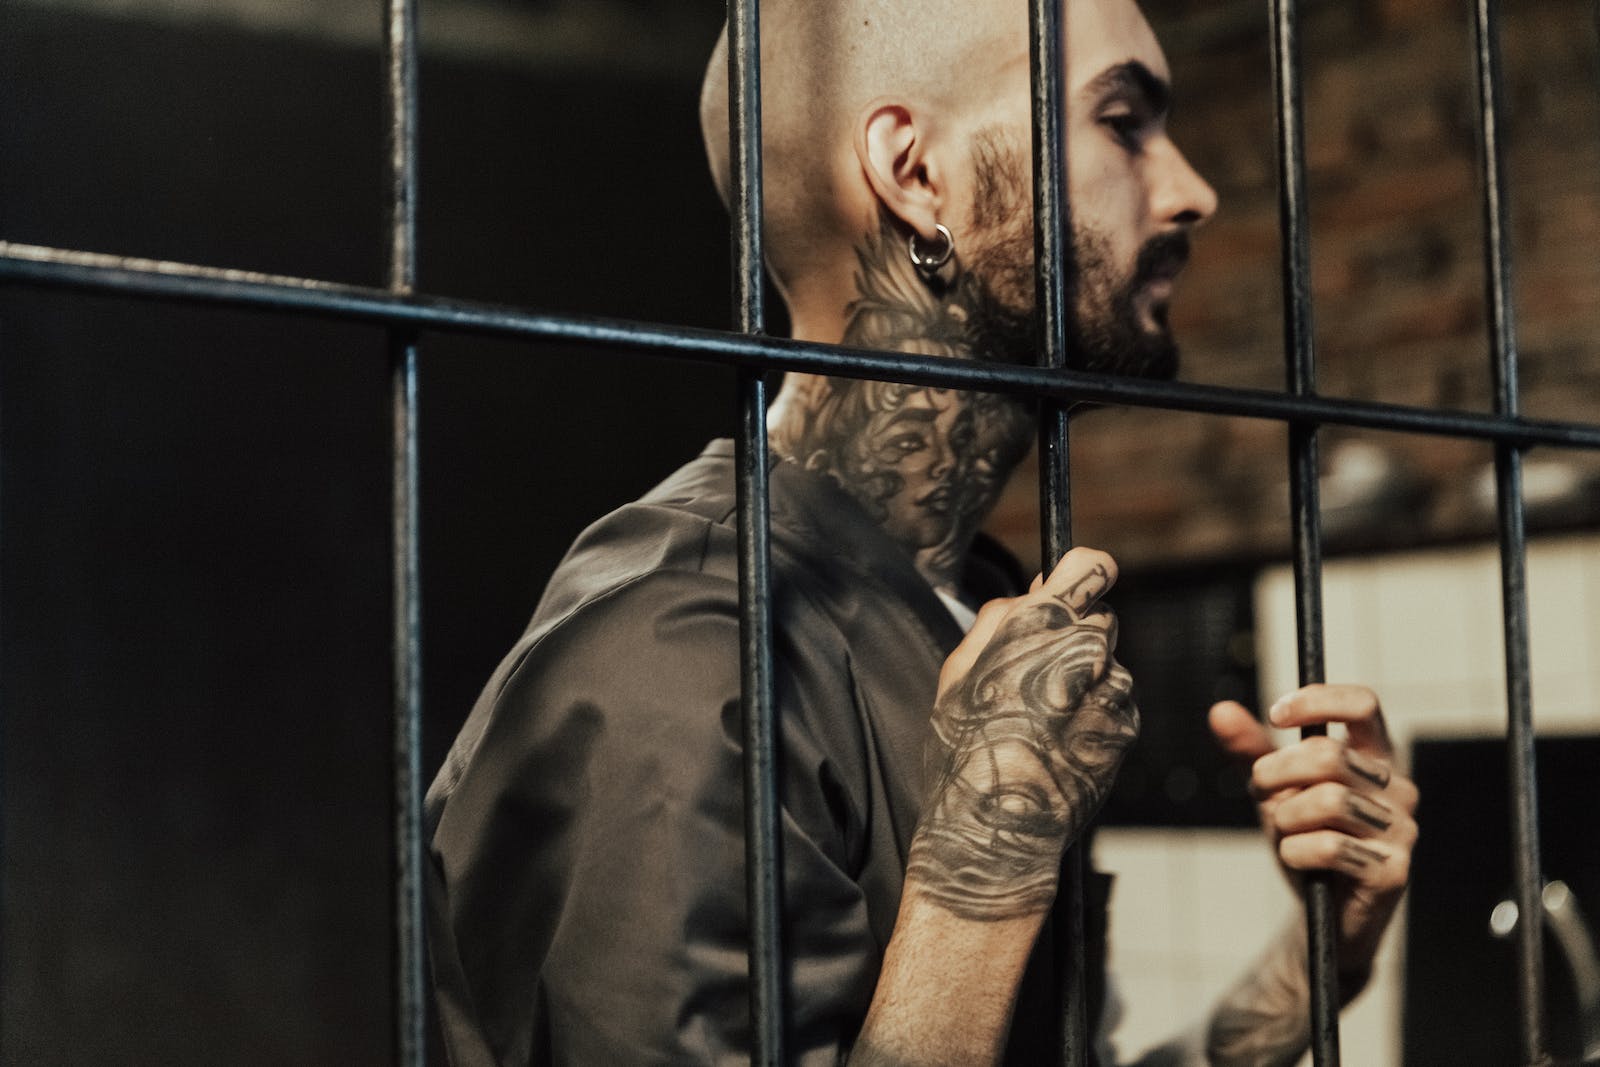 man in jail with body tattoos on his arm and neck